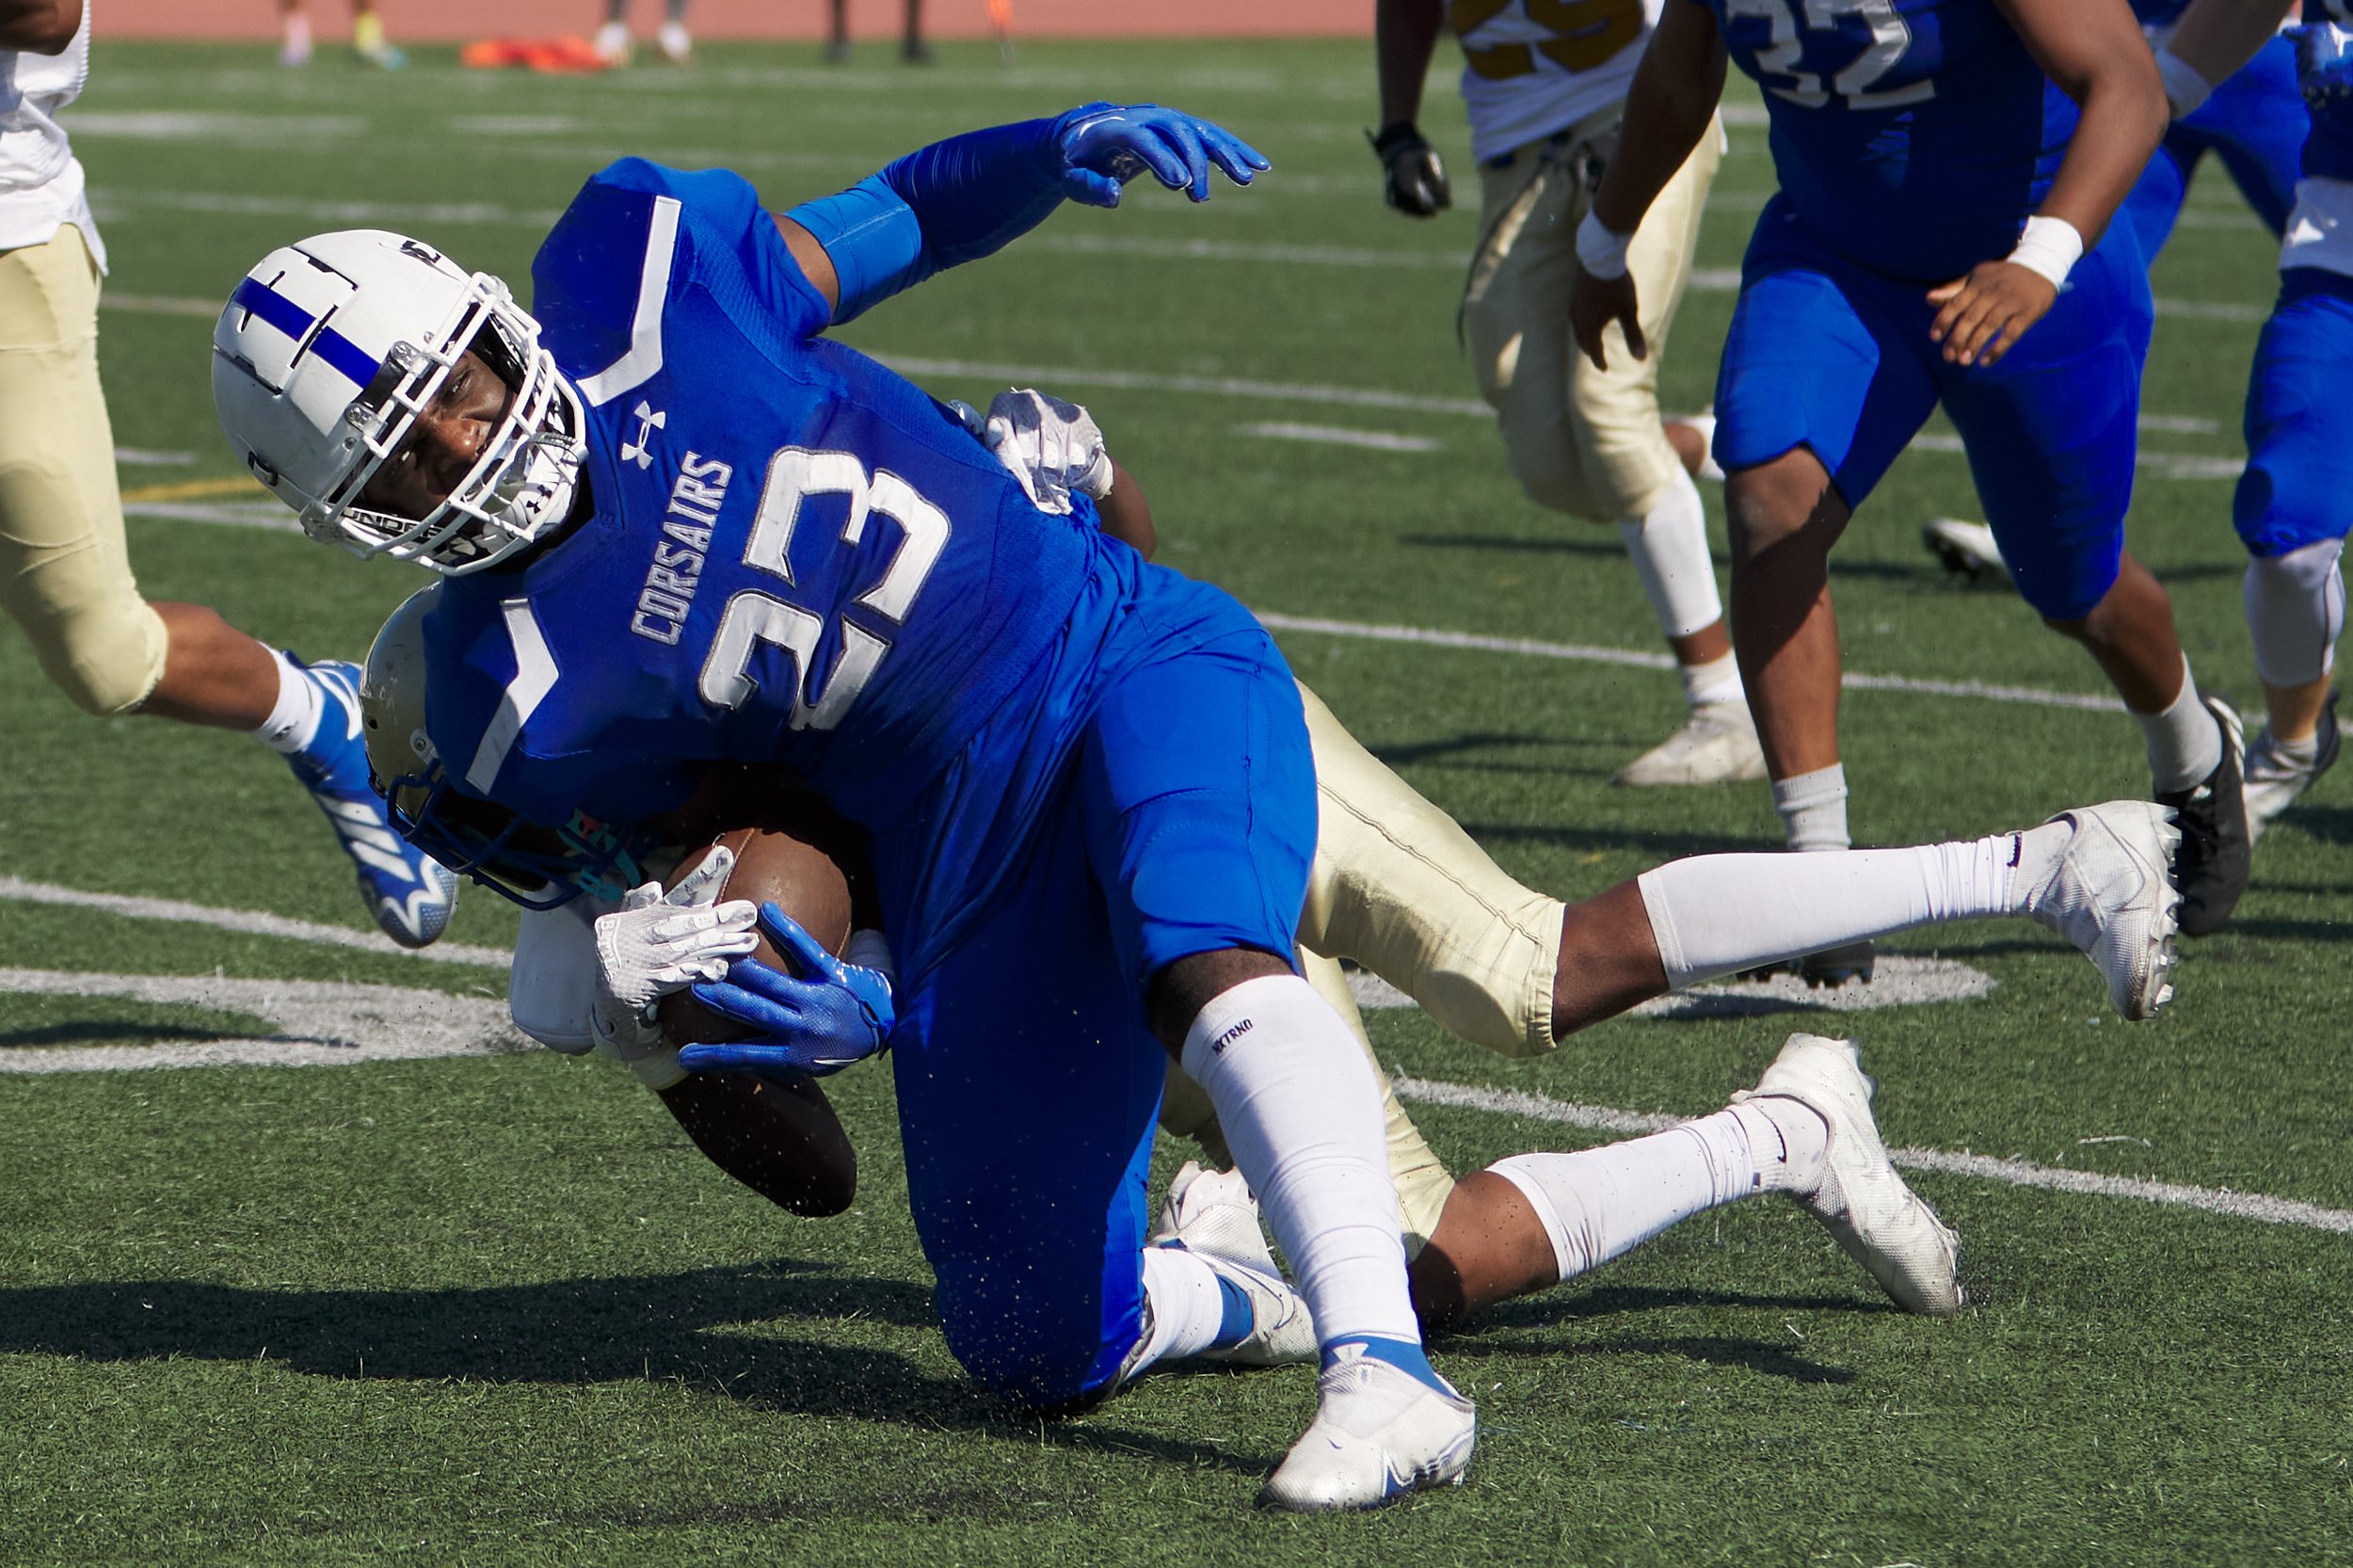  Santa Monica College Corsairs' Zaire Burks gets brought down by the West Los Angeles College Wildcats during the football match on Saturday, October 1, 2022, at Corsair Field in Santa Monica, Calif. The Corsairs won 41-40. (Nicholas McCall | The Cor